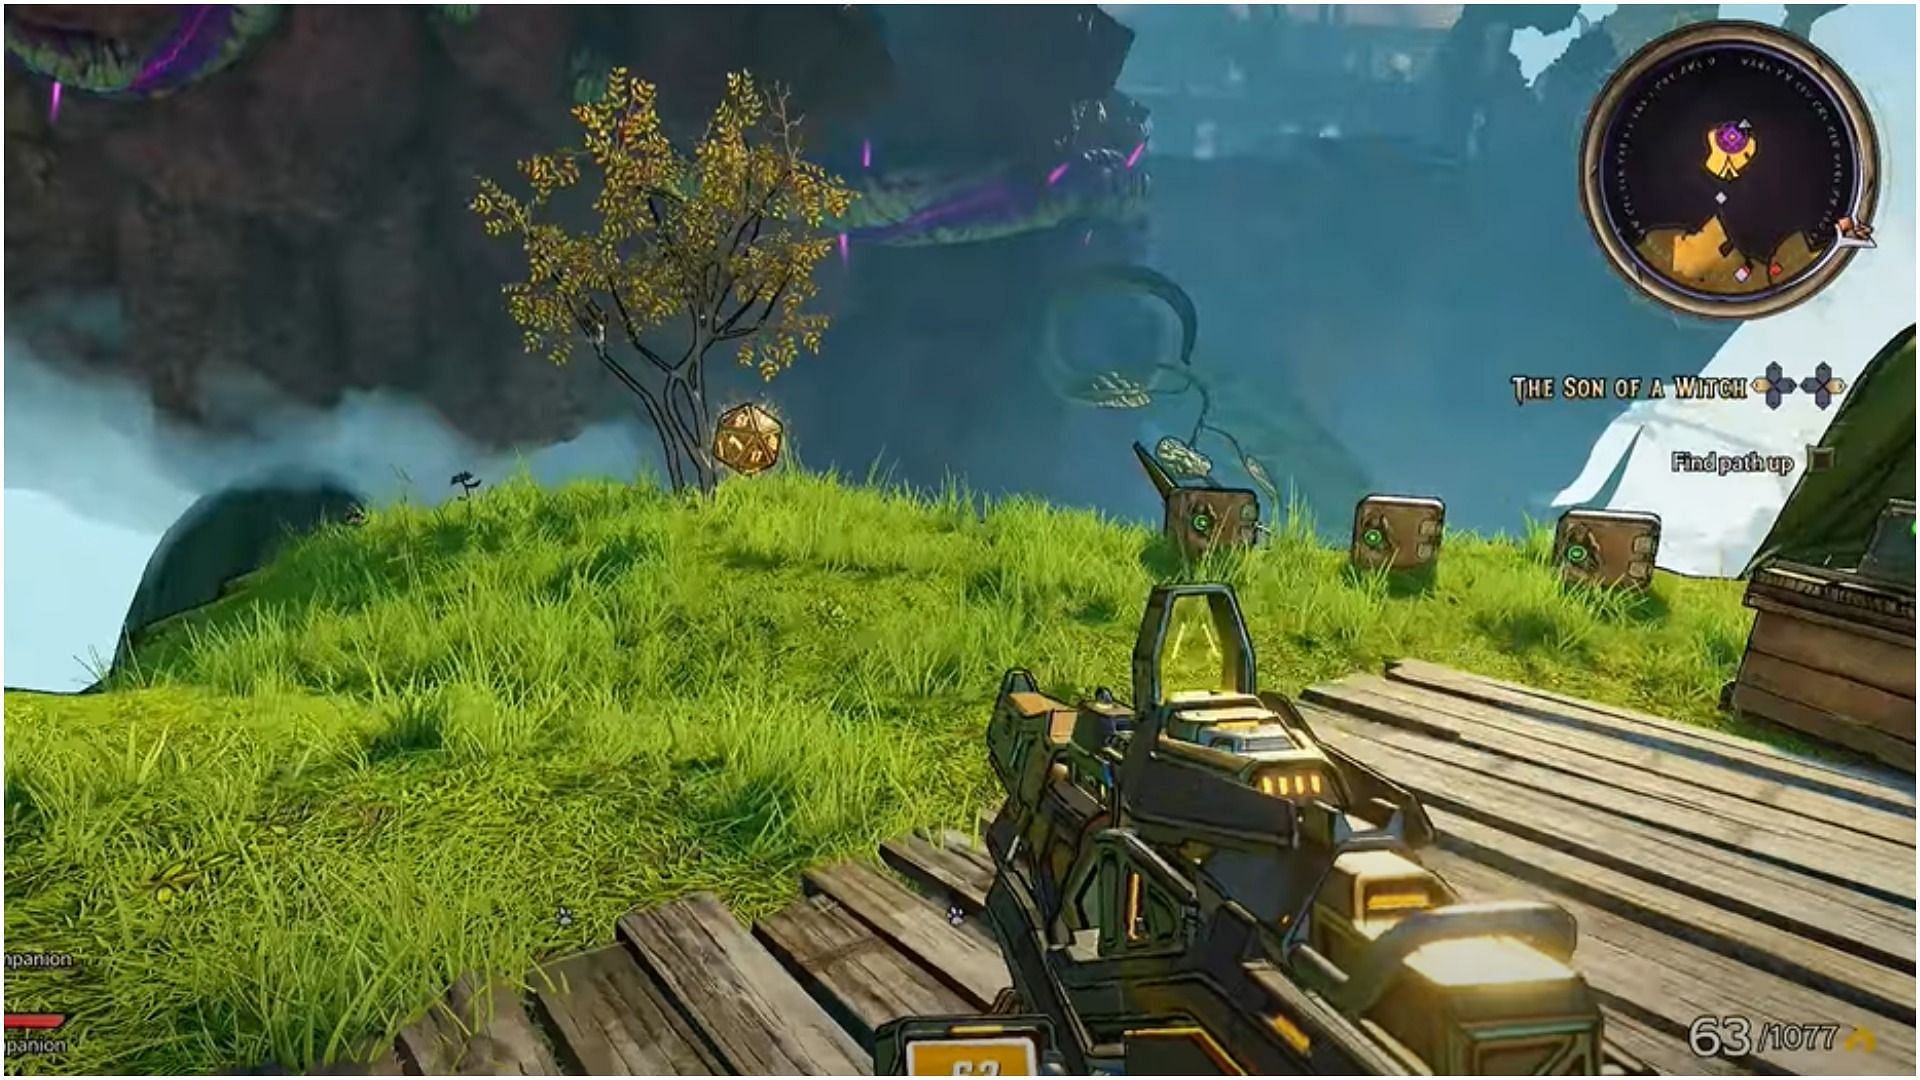 Under the shrub, you will locate the Lucky Dice (Image via WoW Quests/YouTube)